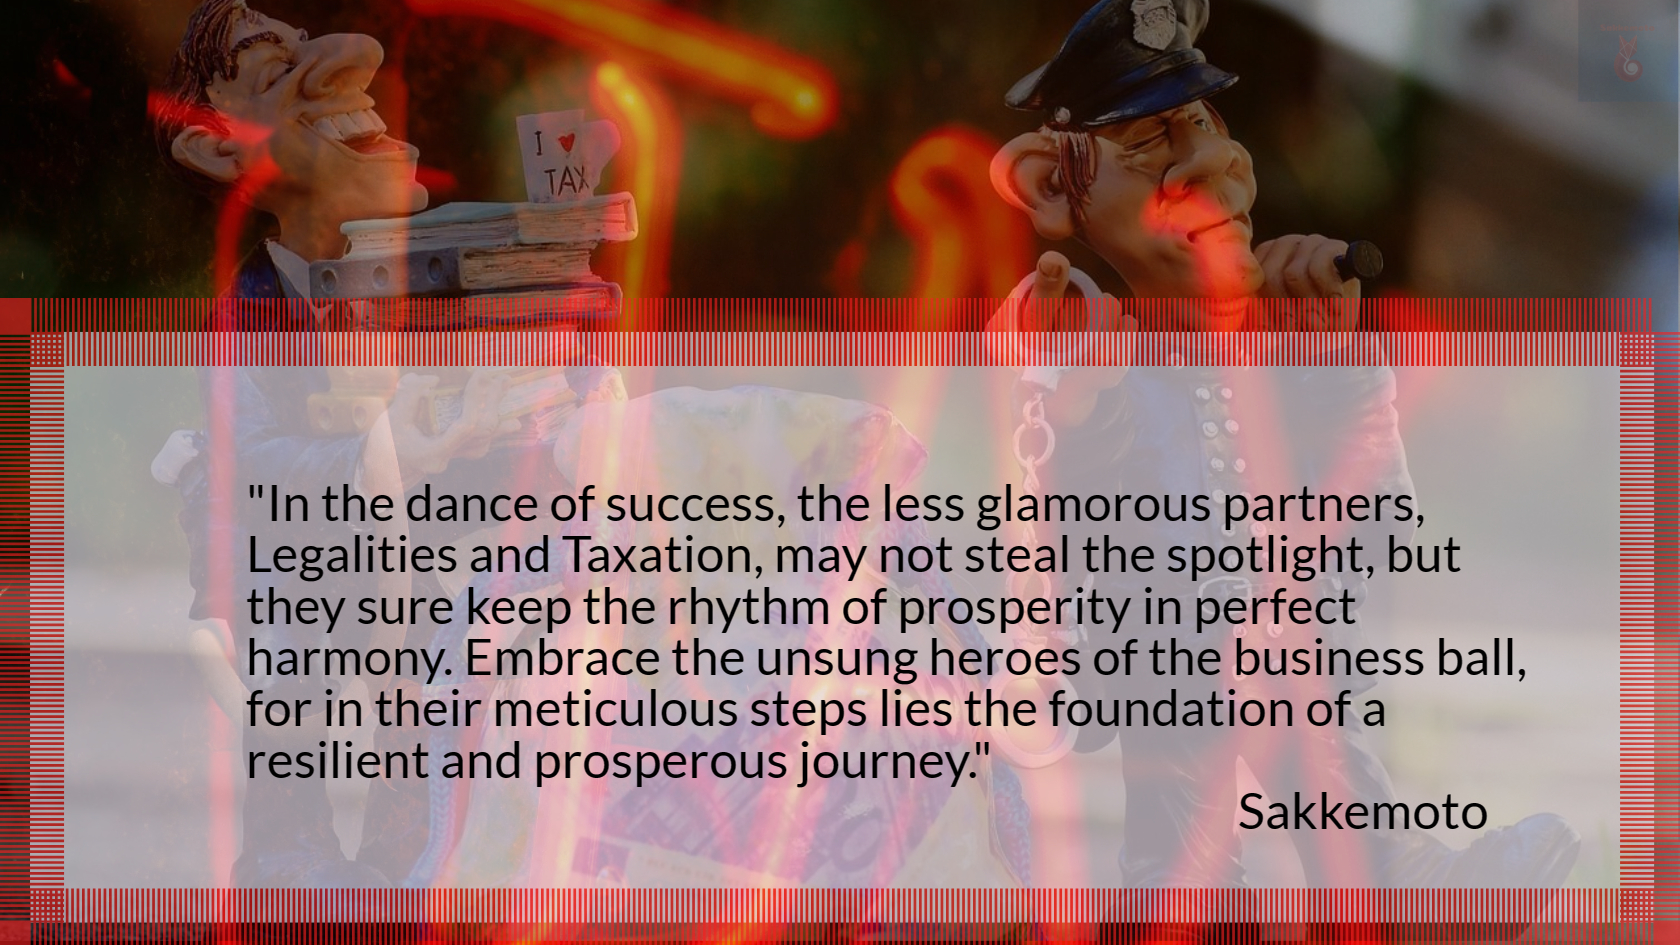 In the dance of success, the less glamorous partners, Legalities and Taxation, may not steal the spotlight, 